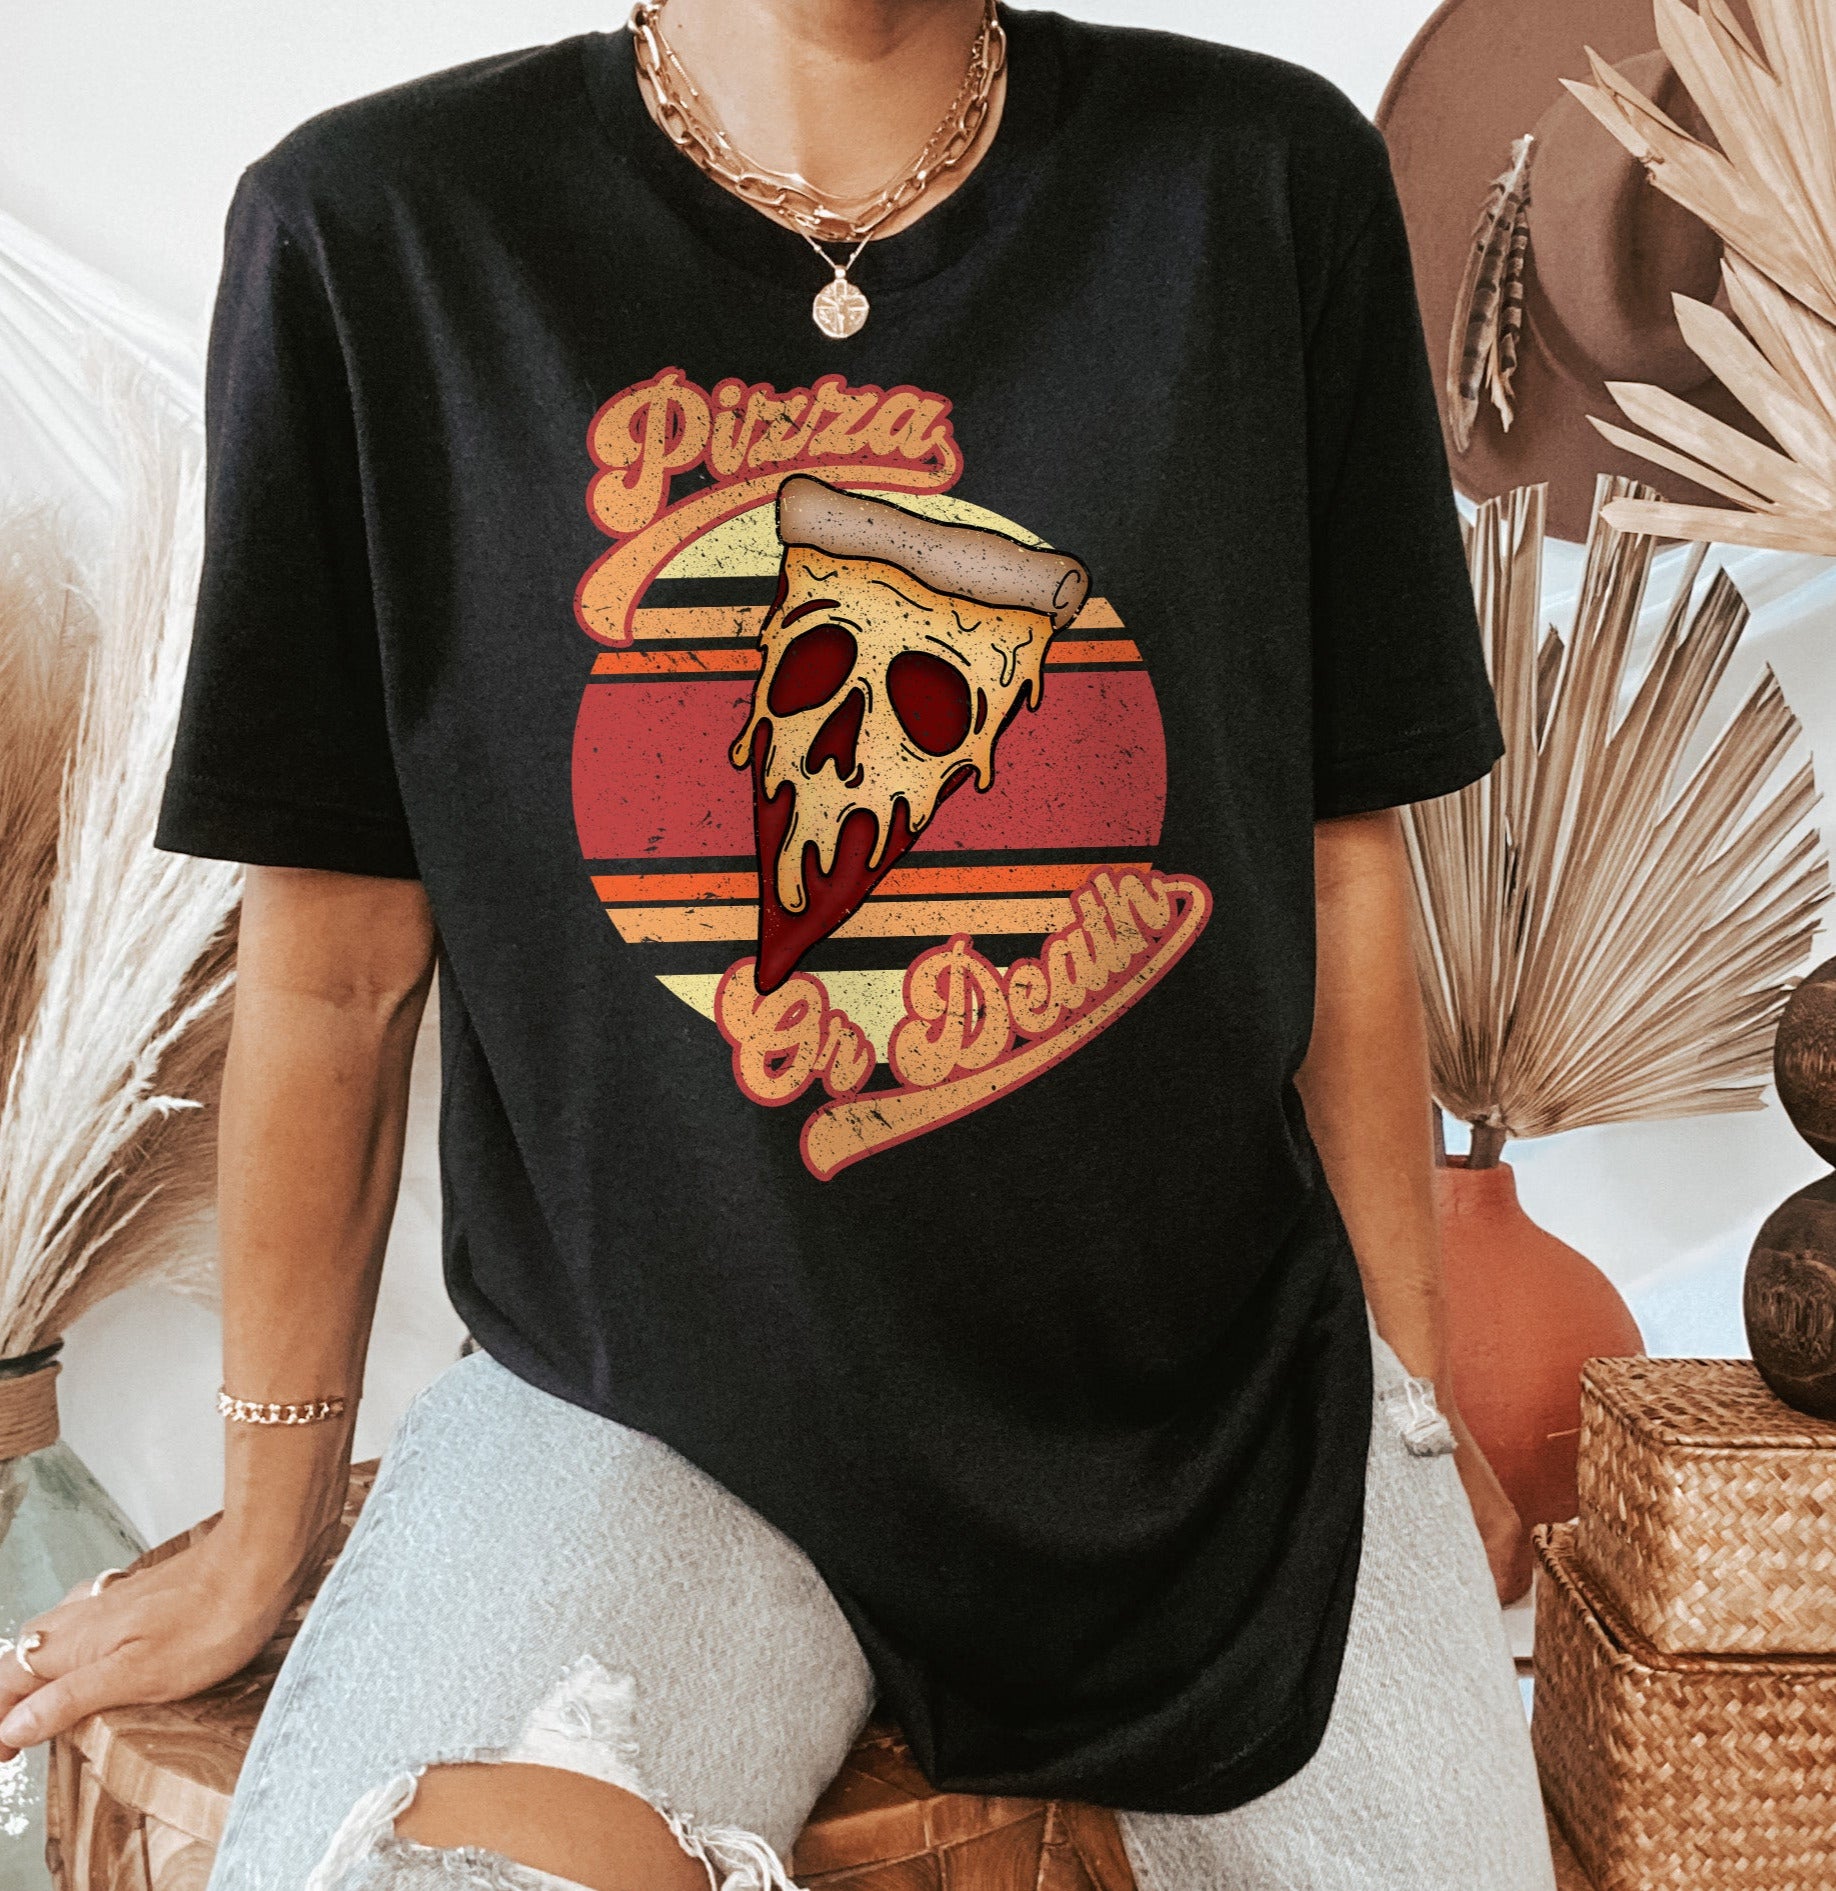 black shirt with a retro pizza graphic that says pizza or death - HighCiti